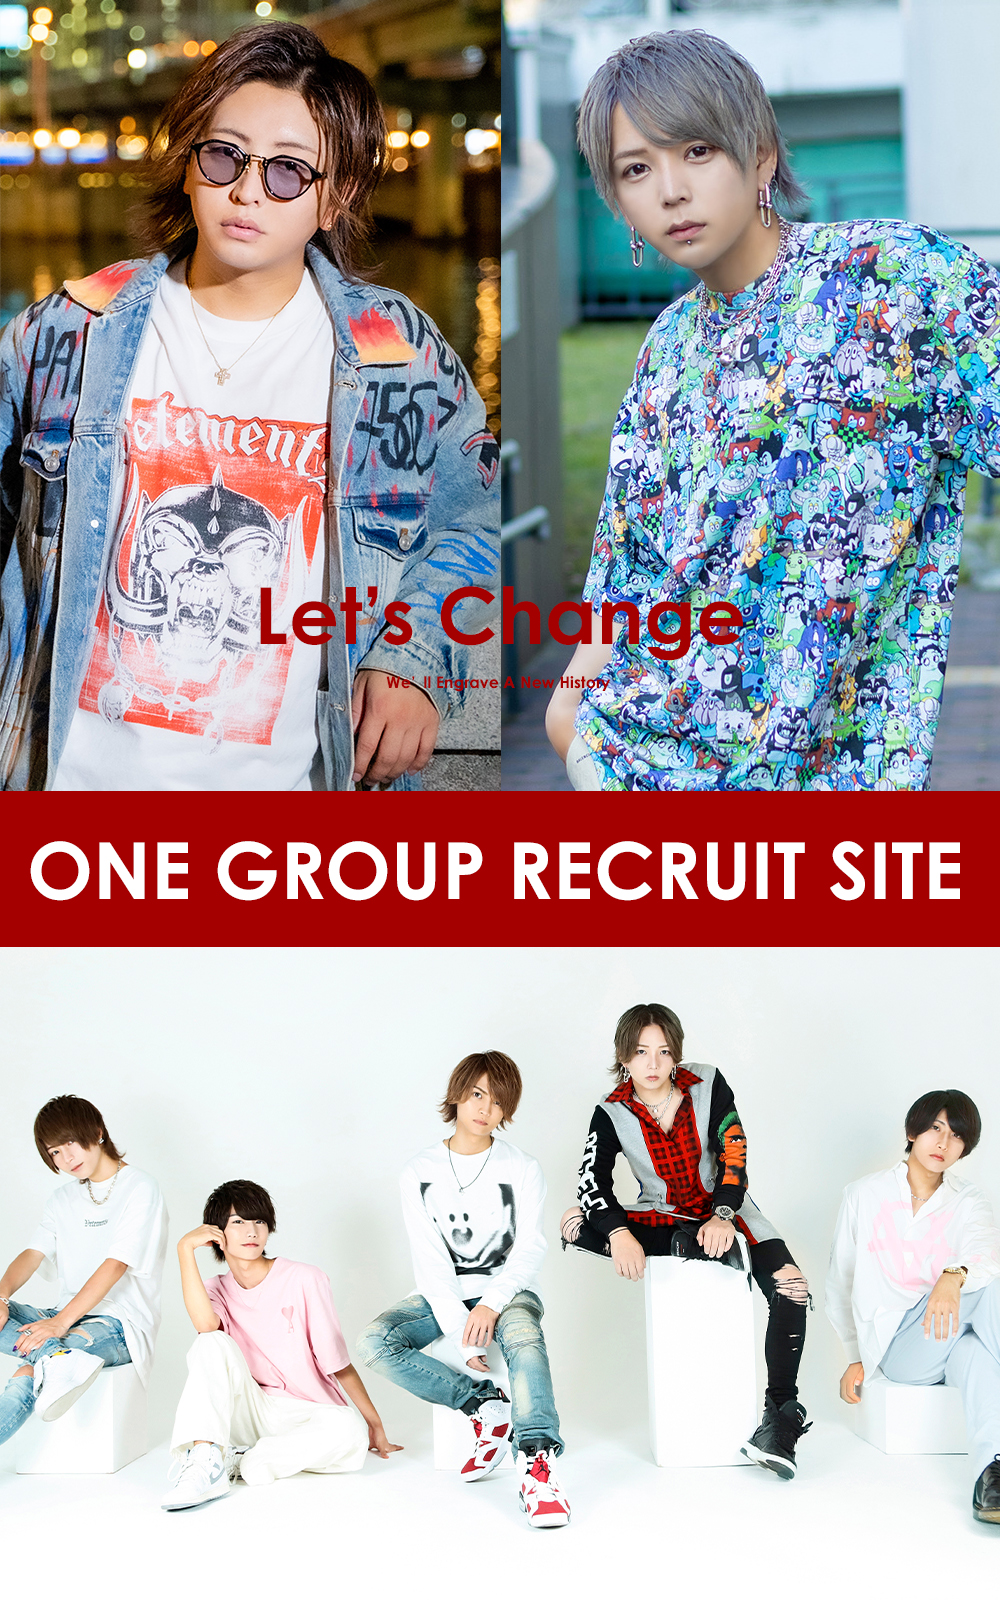 ONE GROUP RECRUIT SITE